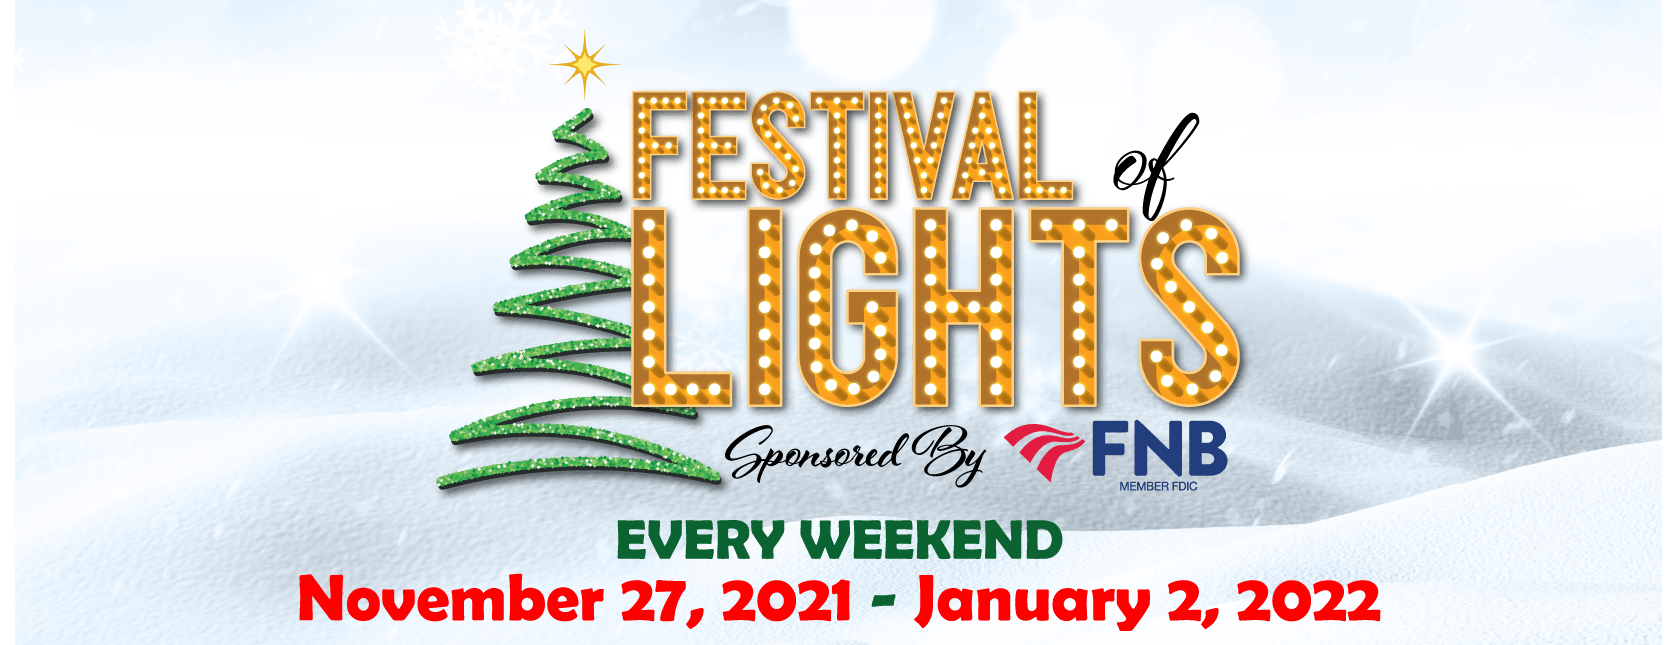 FNB is Title Sponsor of 3rd Annual Festival of Lights